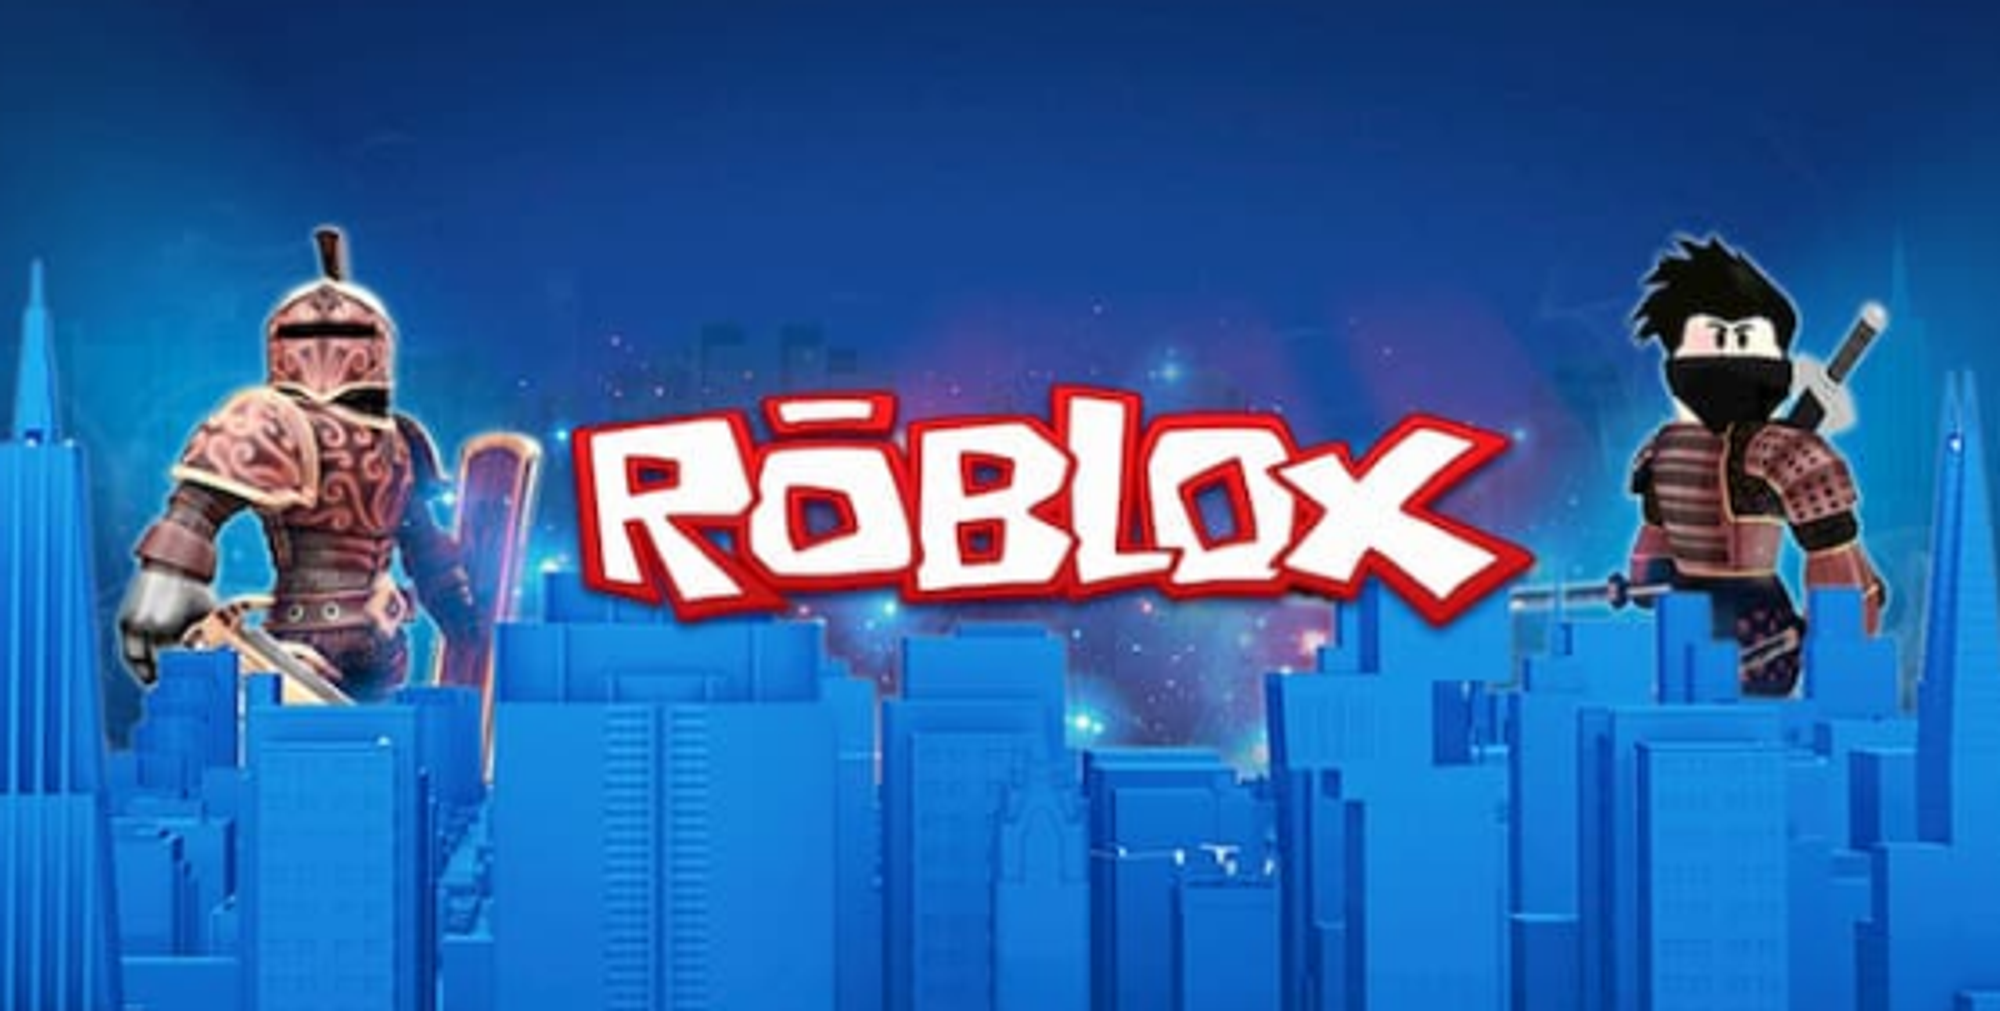 Roblox Robux Codes How To Get Free Robux In Roblox 2020